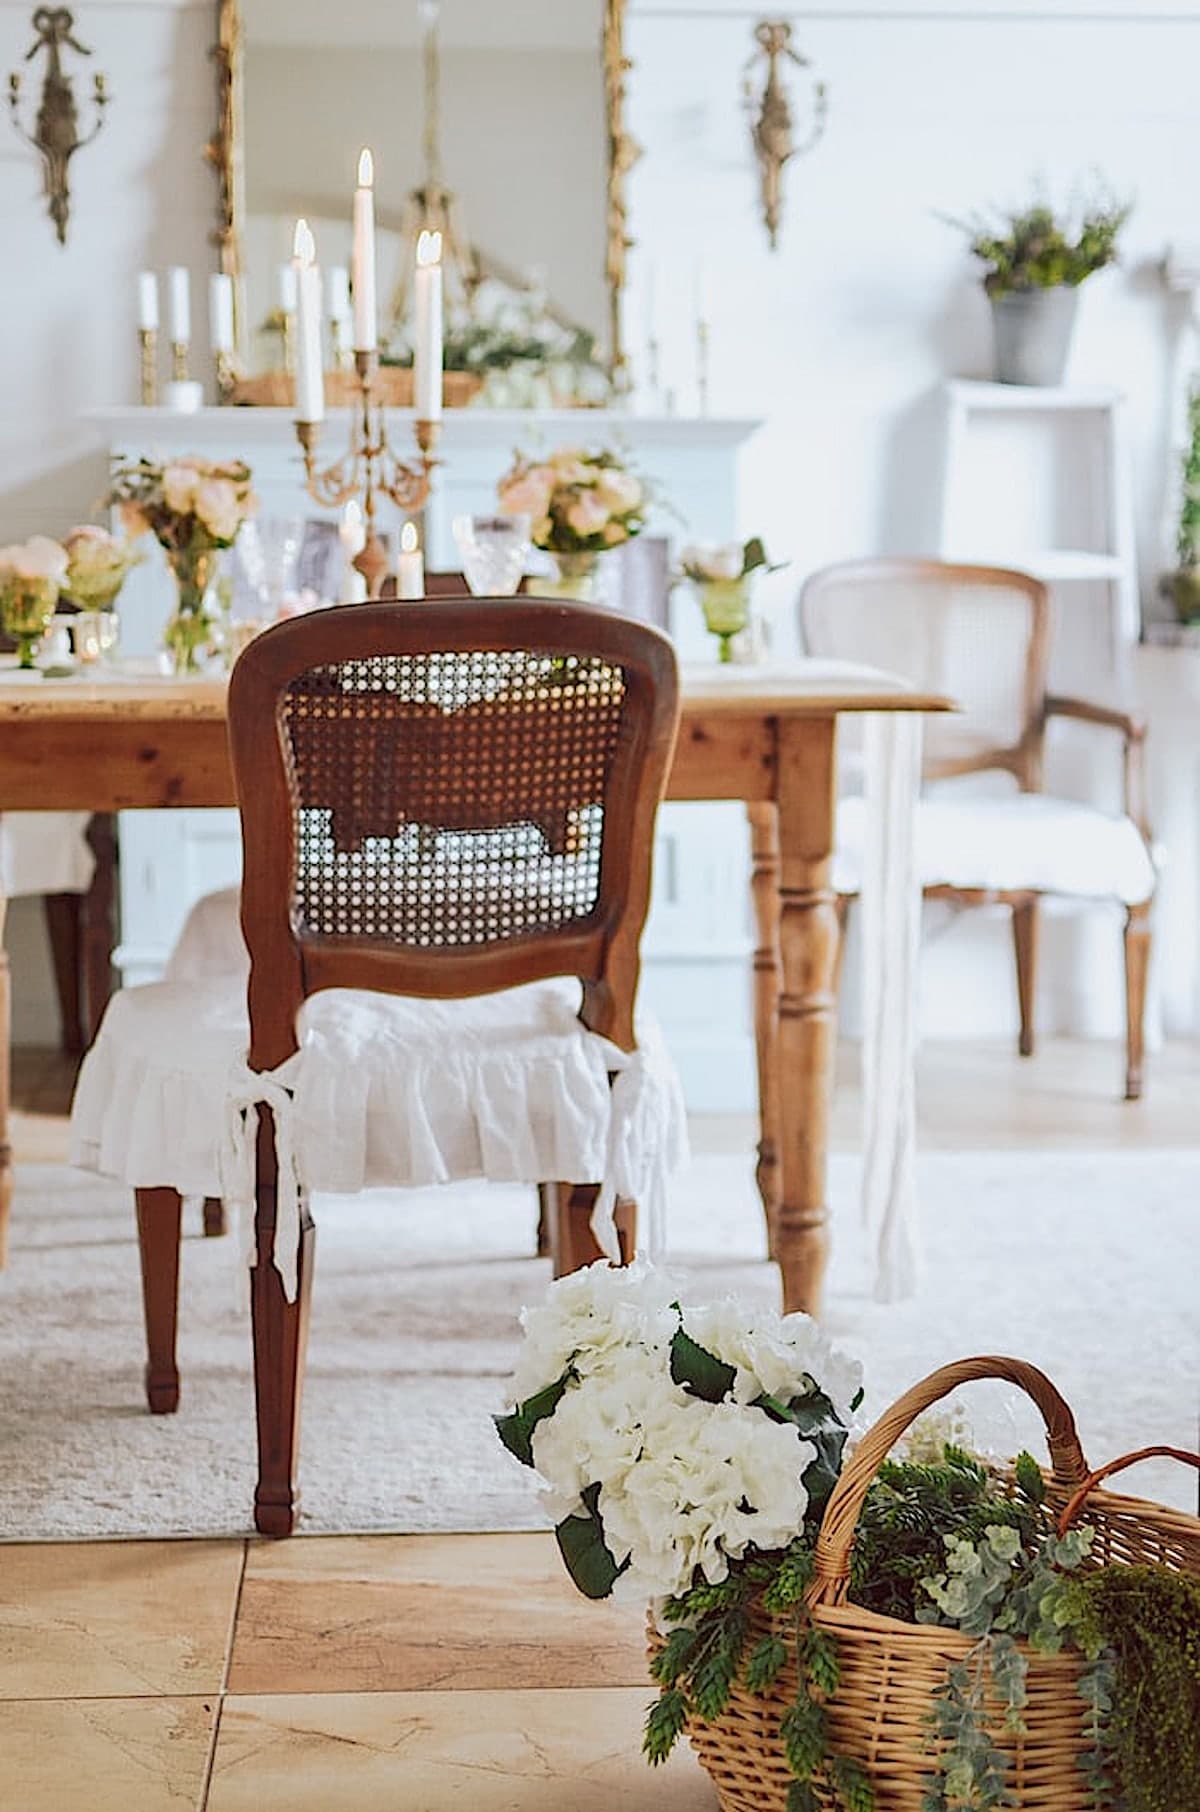 A Thrifty French Cottage, Teacups, Flower Advice & More! French Country Fridays 312